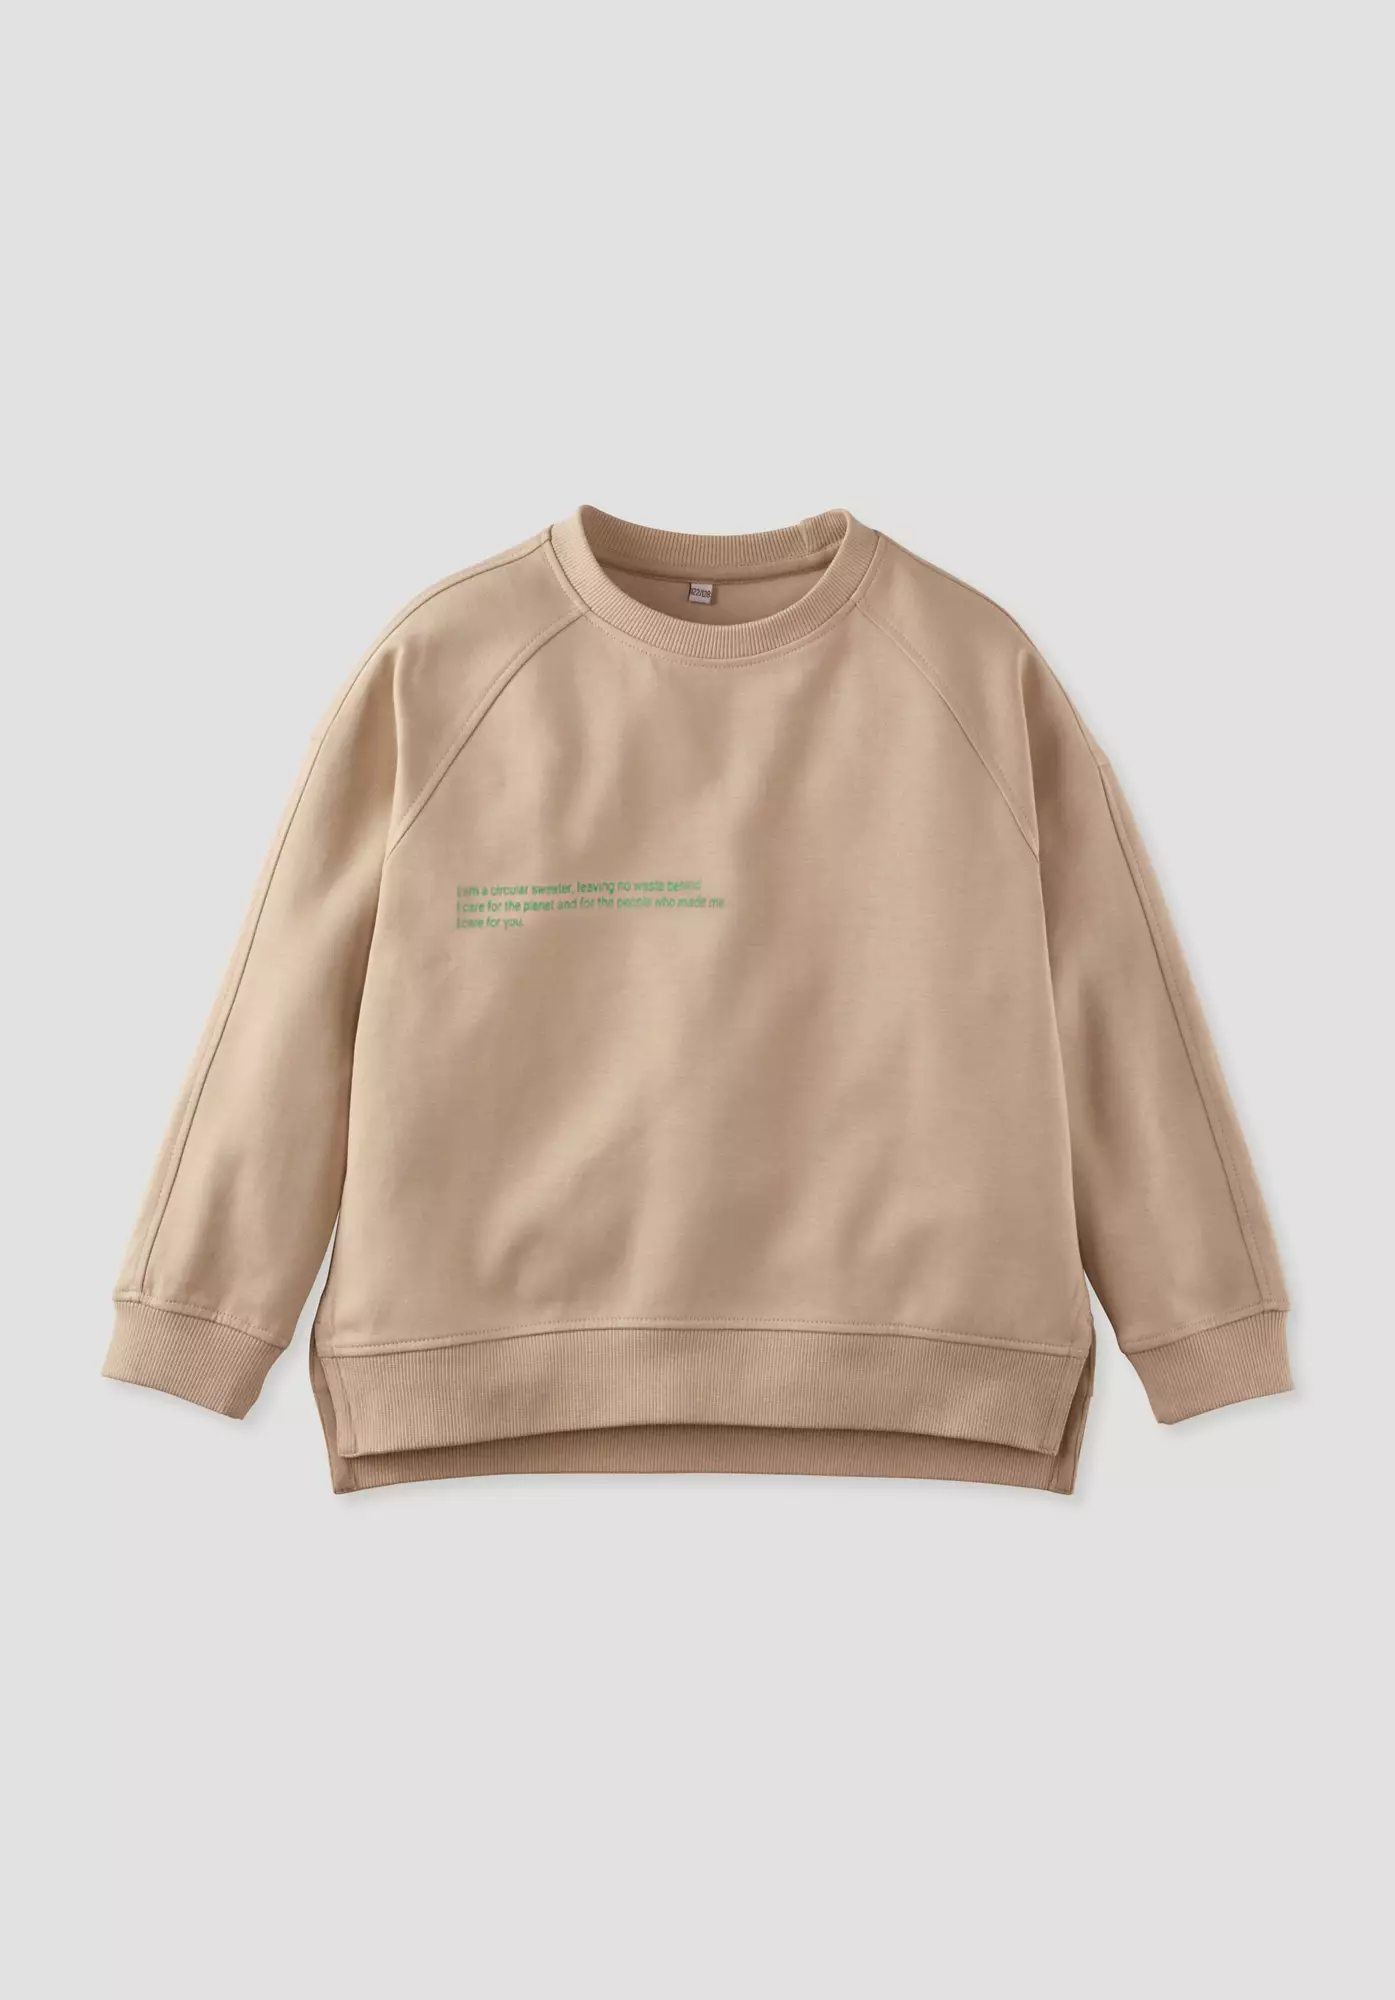 Sweatshirt Cradle to cradle made from pure organic cotton - 1